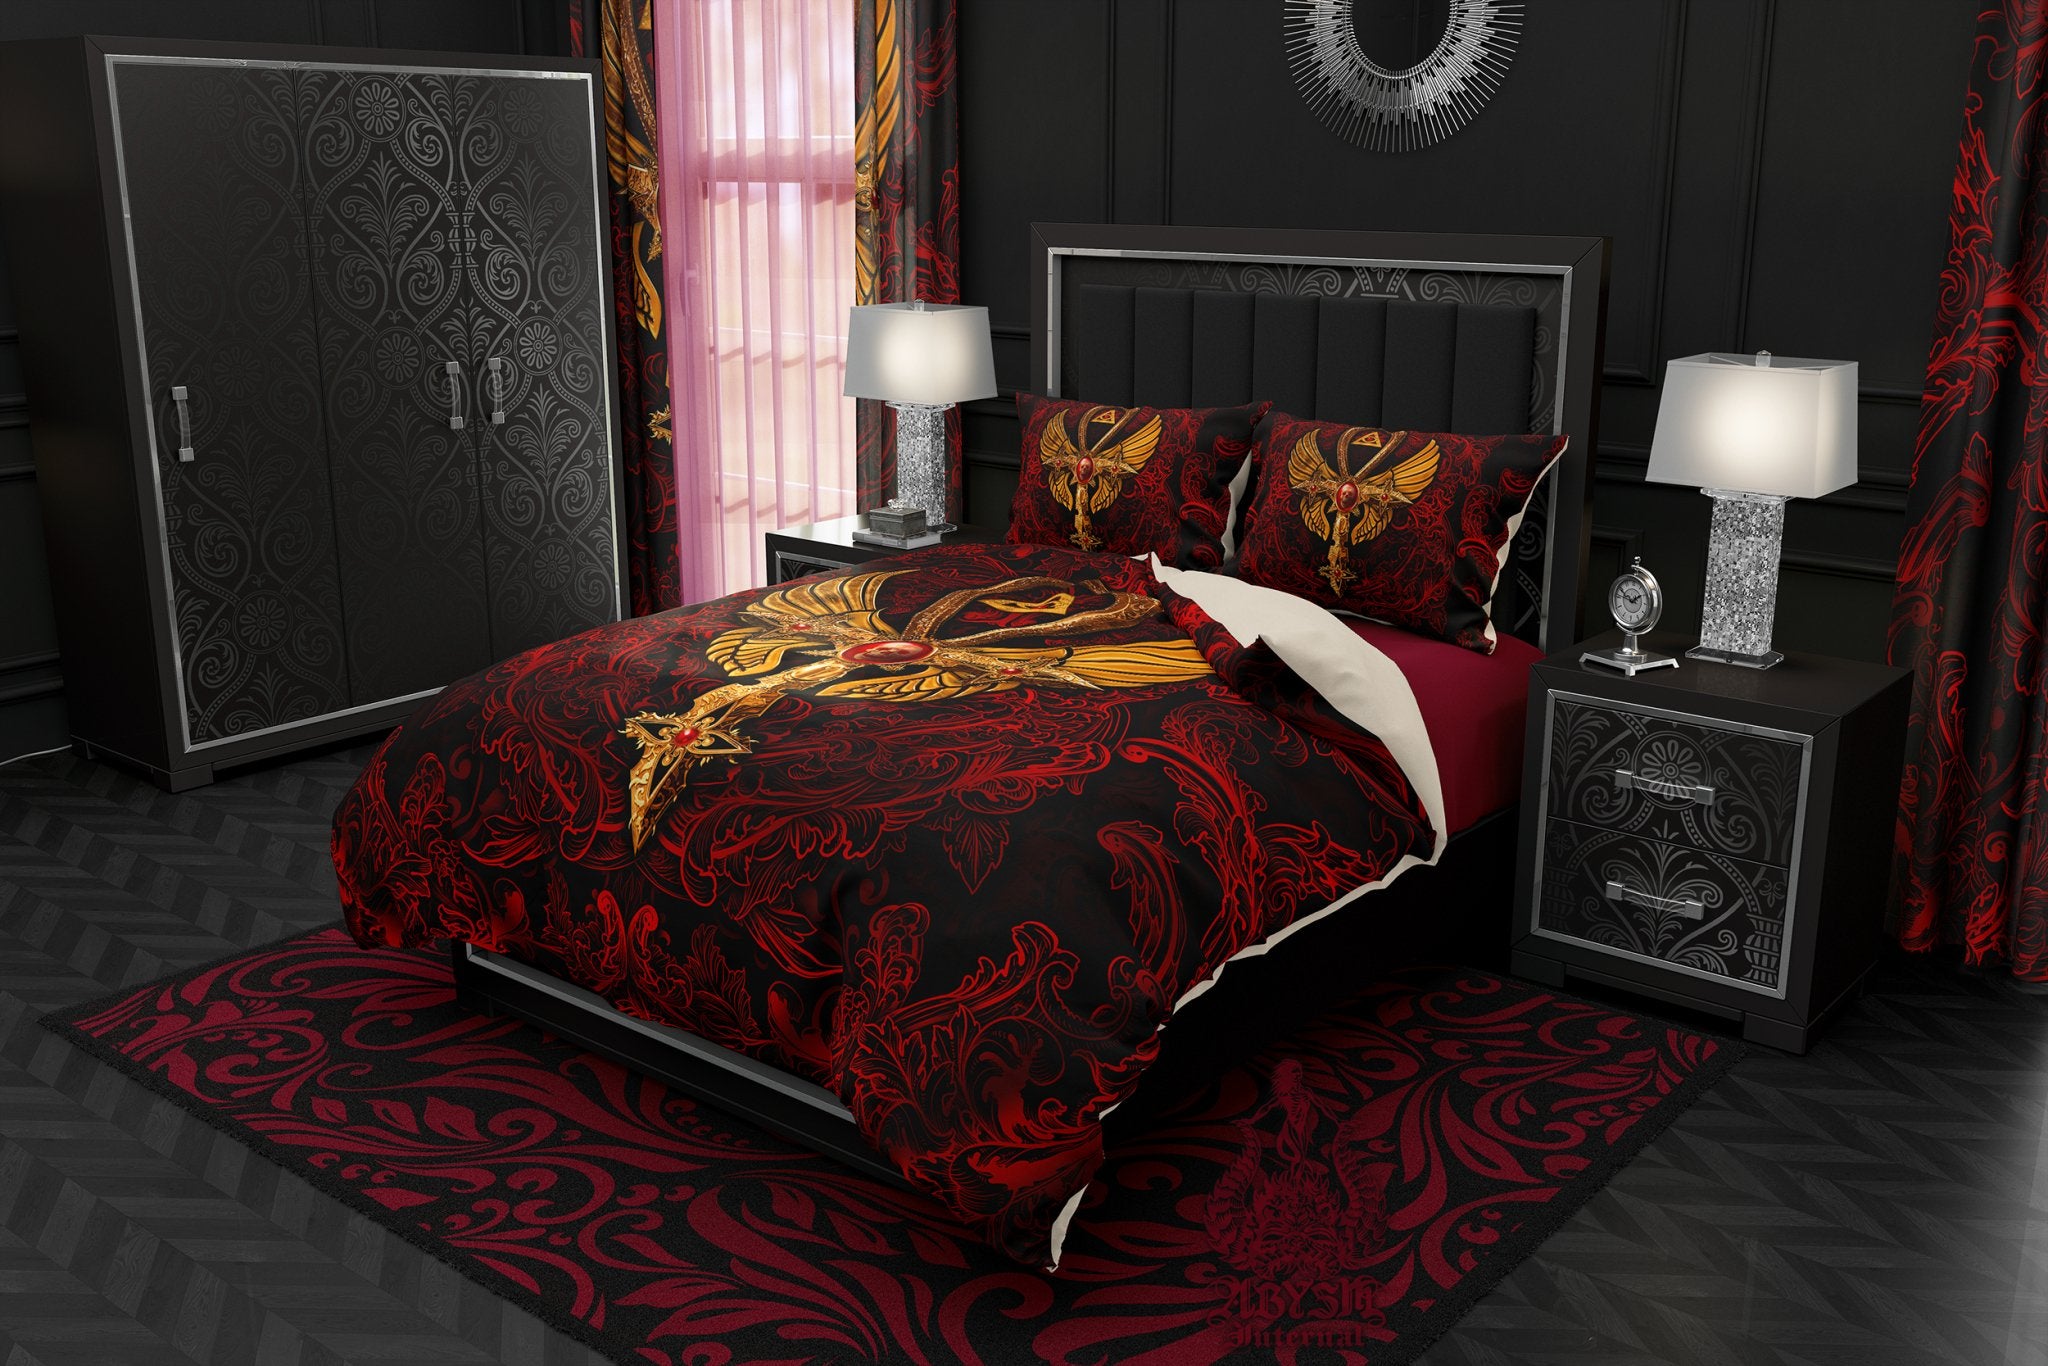 Bloody Gothic Comforter or Duvet, Red Ankh Bed Cover, Goth Bedroom Decor, King, Queen & Twin Bedding Set - Dark, Gold, Black, 3 Colors - Abysm Internal